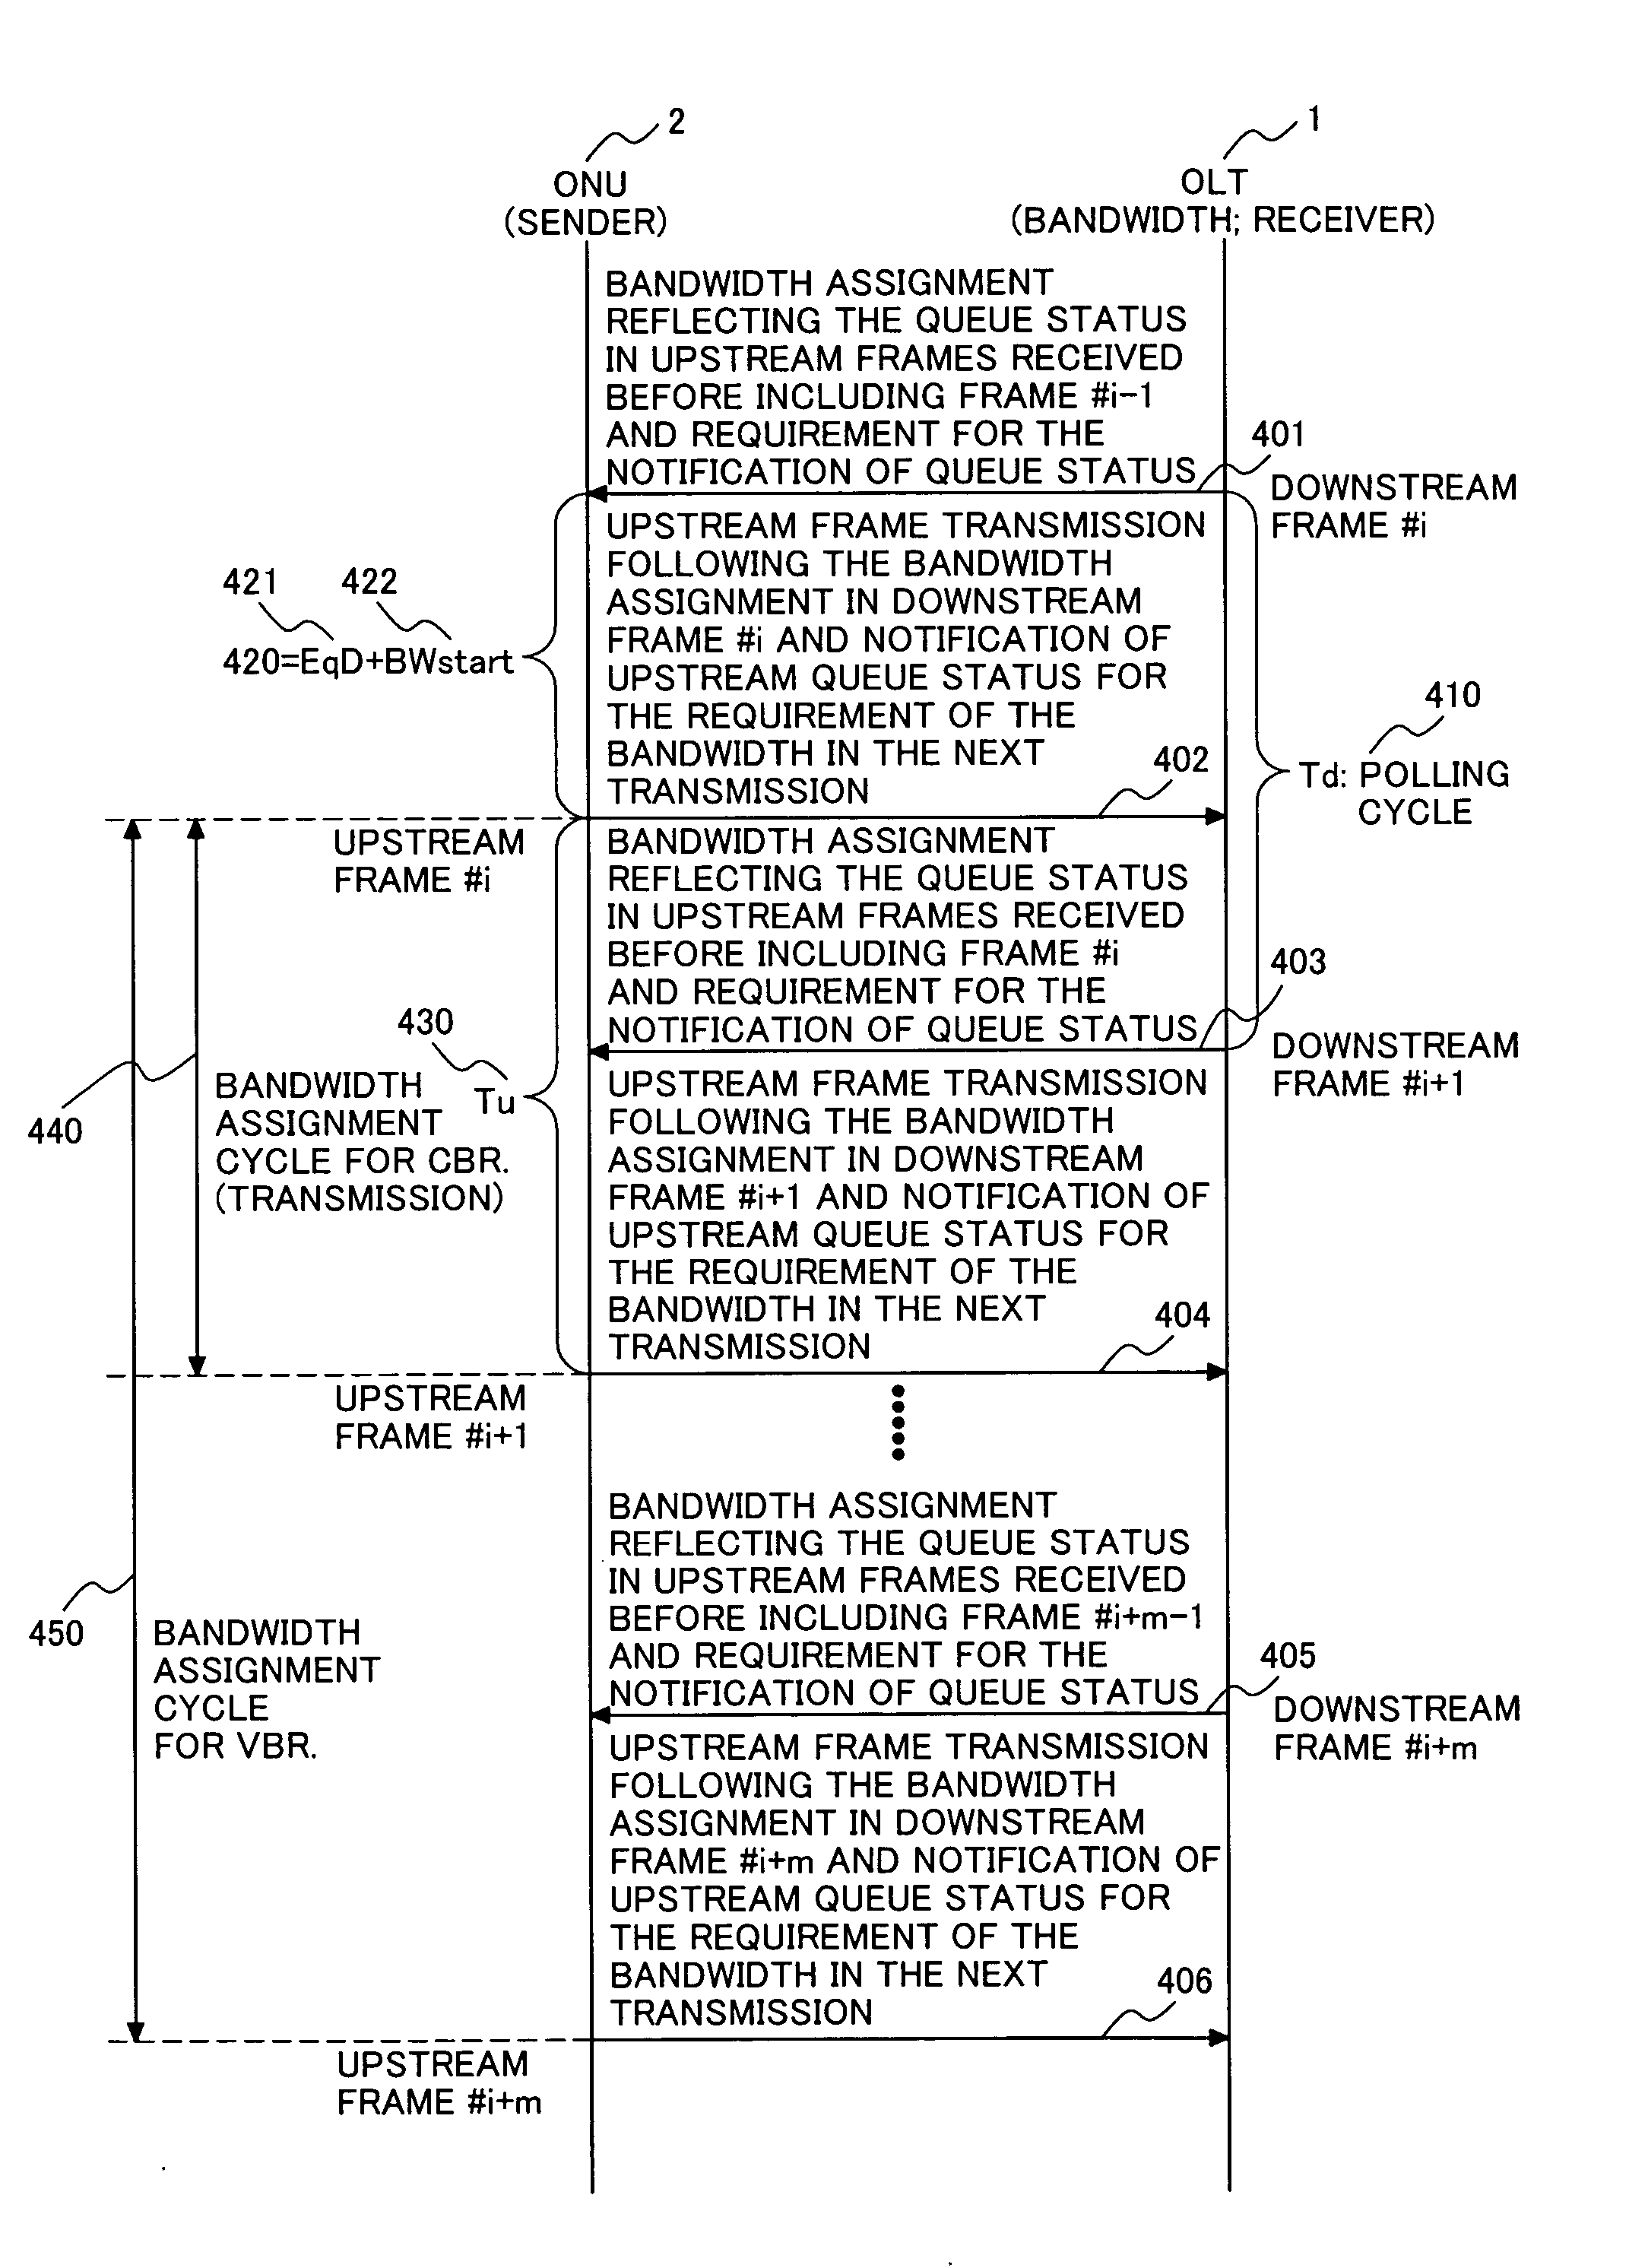 Transmission apparatus with function of multi-step bandwidth assignment to other communication apparatuses